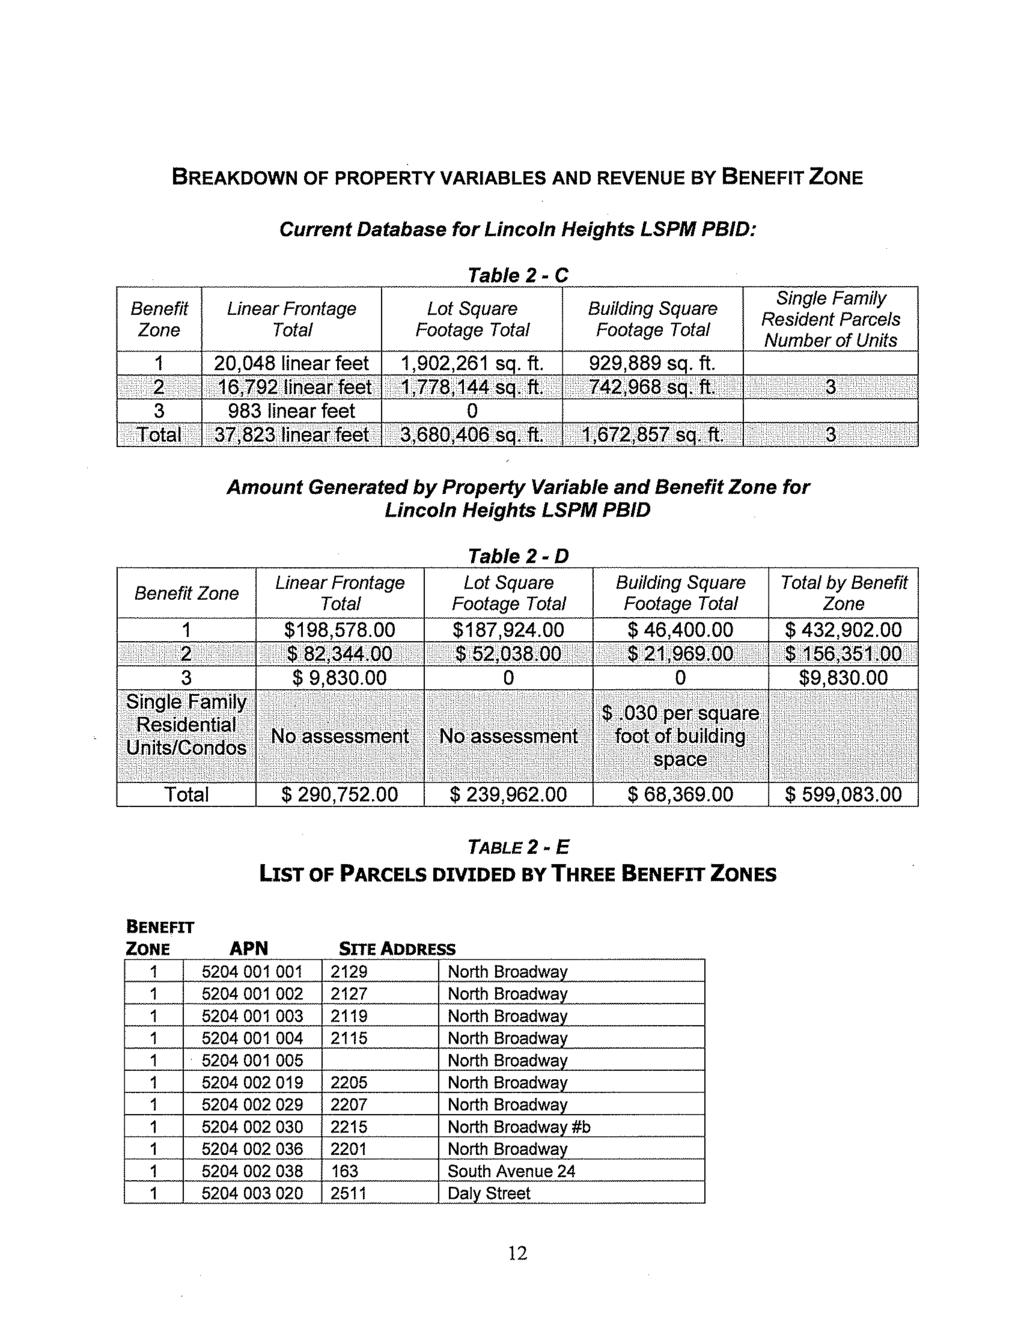 BREAKDOWN OF PROPERTY VARIABLES AND REVENUE BY BENEFIT ZONE Current Database for Lincoln Heights LSPM PBID: Benefit Zone Linear Frontage Total Table 2 C Lot Square Footage Total Building Square